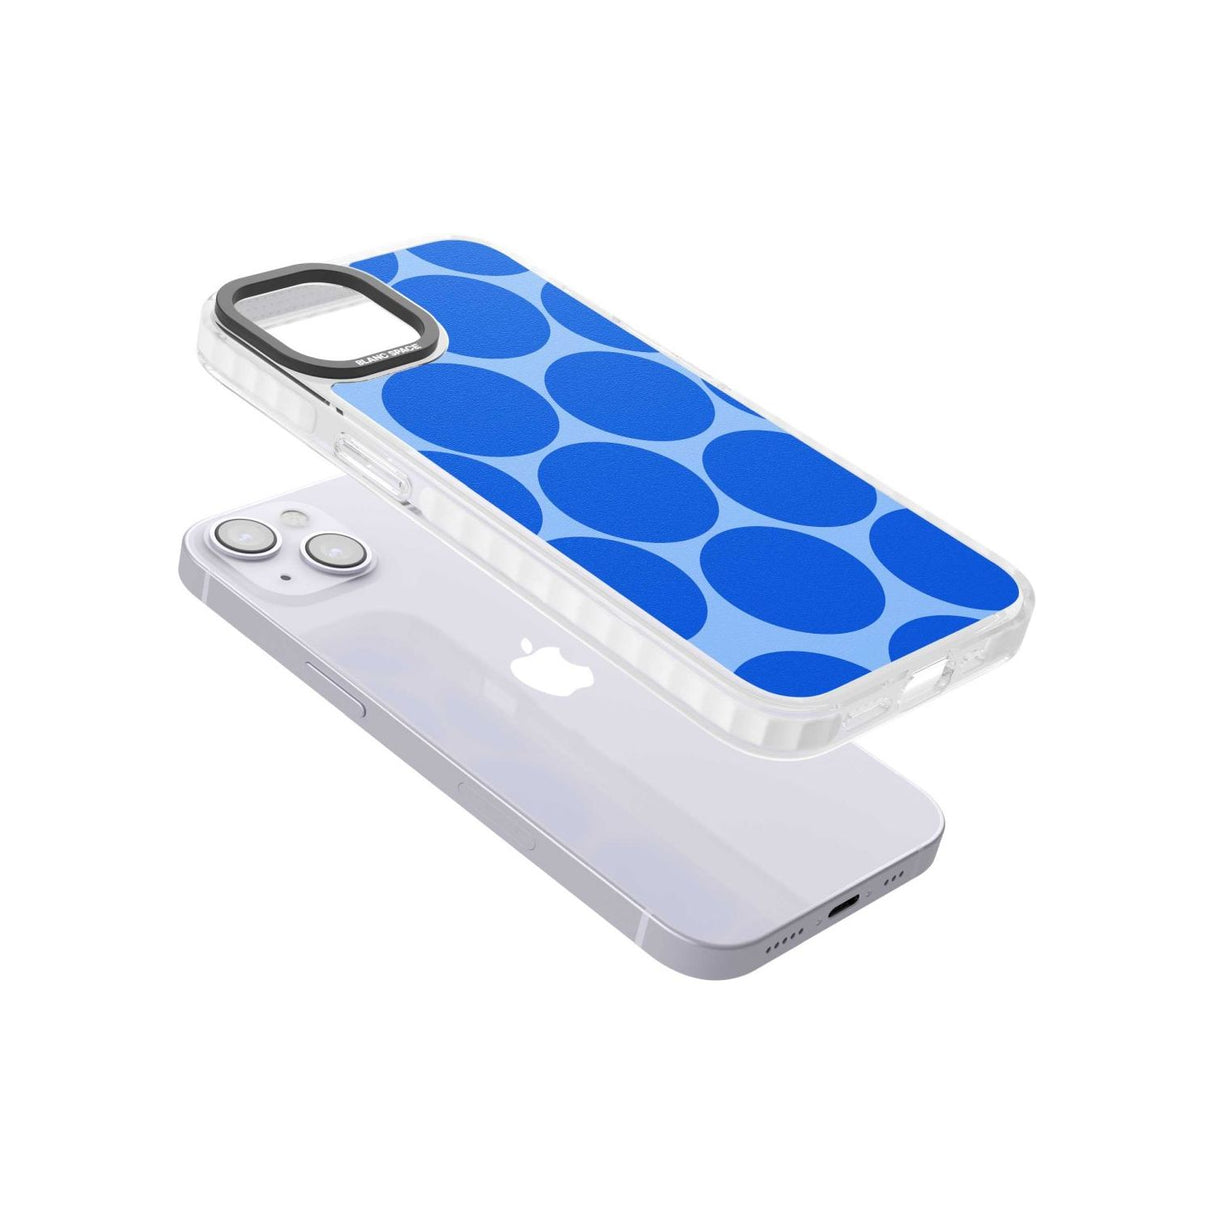 Abstract Retro Shapes: Blue Dots Phone Case iPhone 15 Pro Max / Black Impact Case,iPhone 15 Plus / Black Impact Case,iPhone 15 Pro / Black Impact Case,iPhone 15 / Black Impact Case,iPhone 15 Pro Max / Impact Case,iPhone 15 Plus / Impact Case,iPhone 15 Pro / Impact Case,iPhone 15 / Impact Case,iPhone 15 Pro Max / Magsafe Black Impact Case,iPhone 15 Plus / Magsafe Black Impact Case,iPhone 15 Pro / Magsafe Black Impact Case,iPhone 15 / Magsafe Black Impact Case,iPhone 14 Pro Max / Black Impact Case,iPhone 14 P